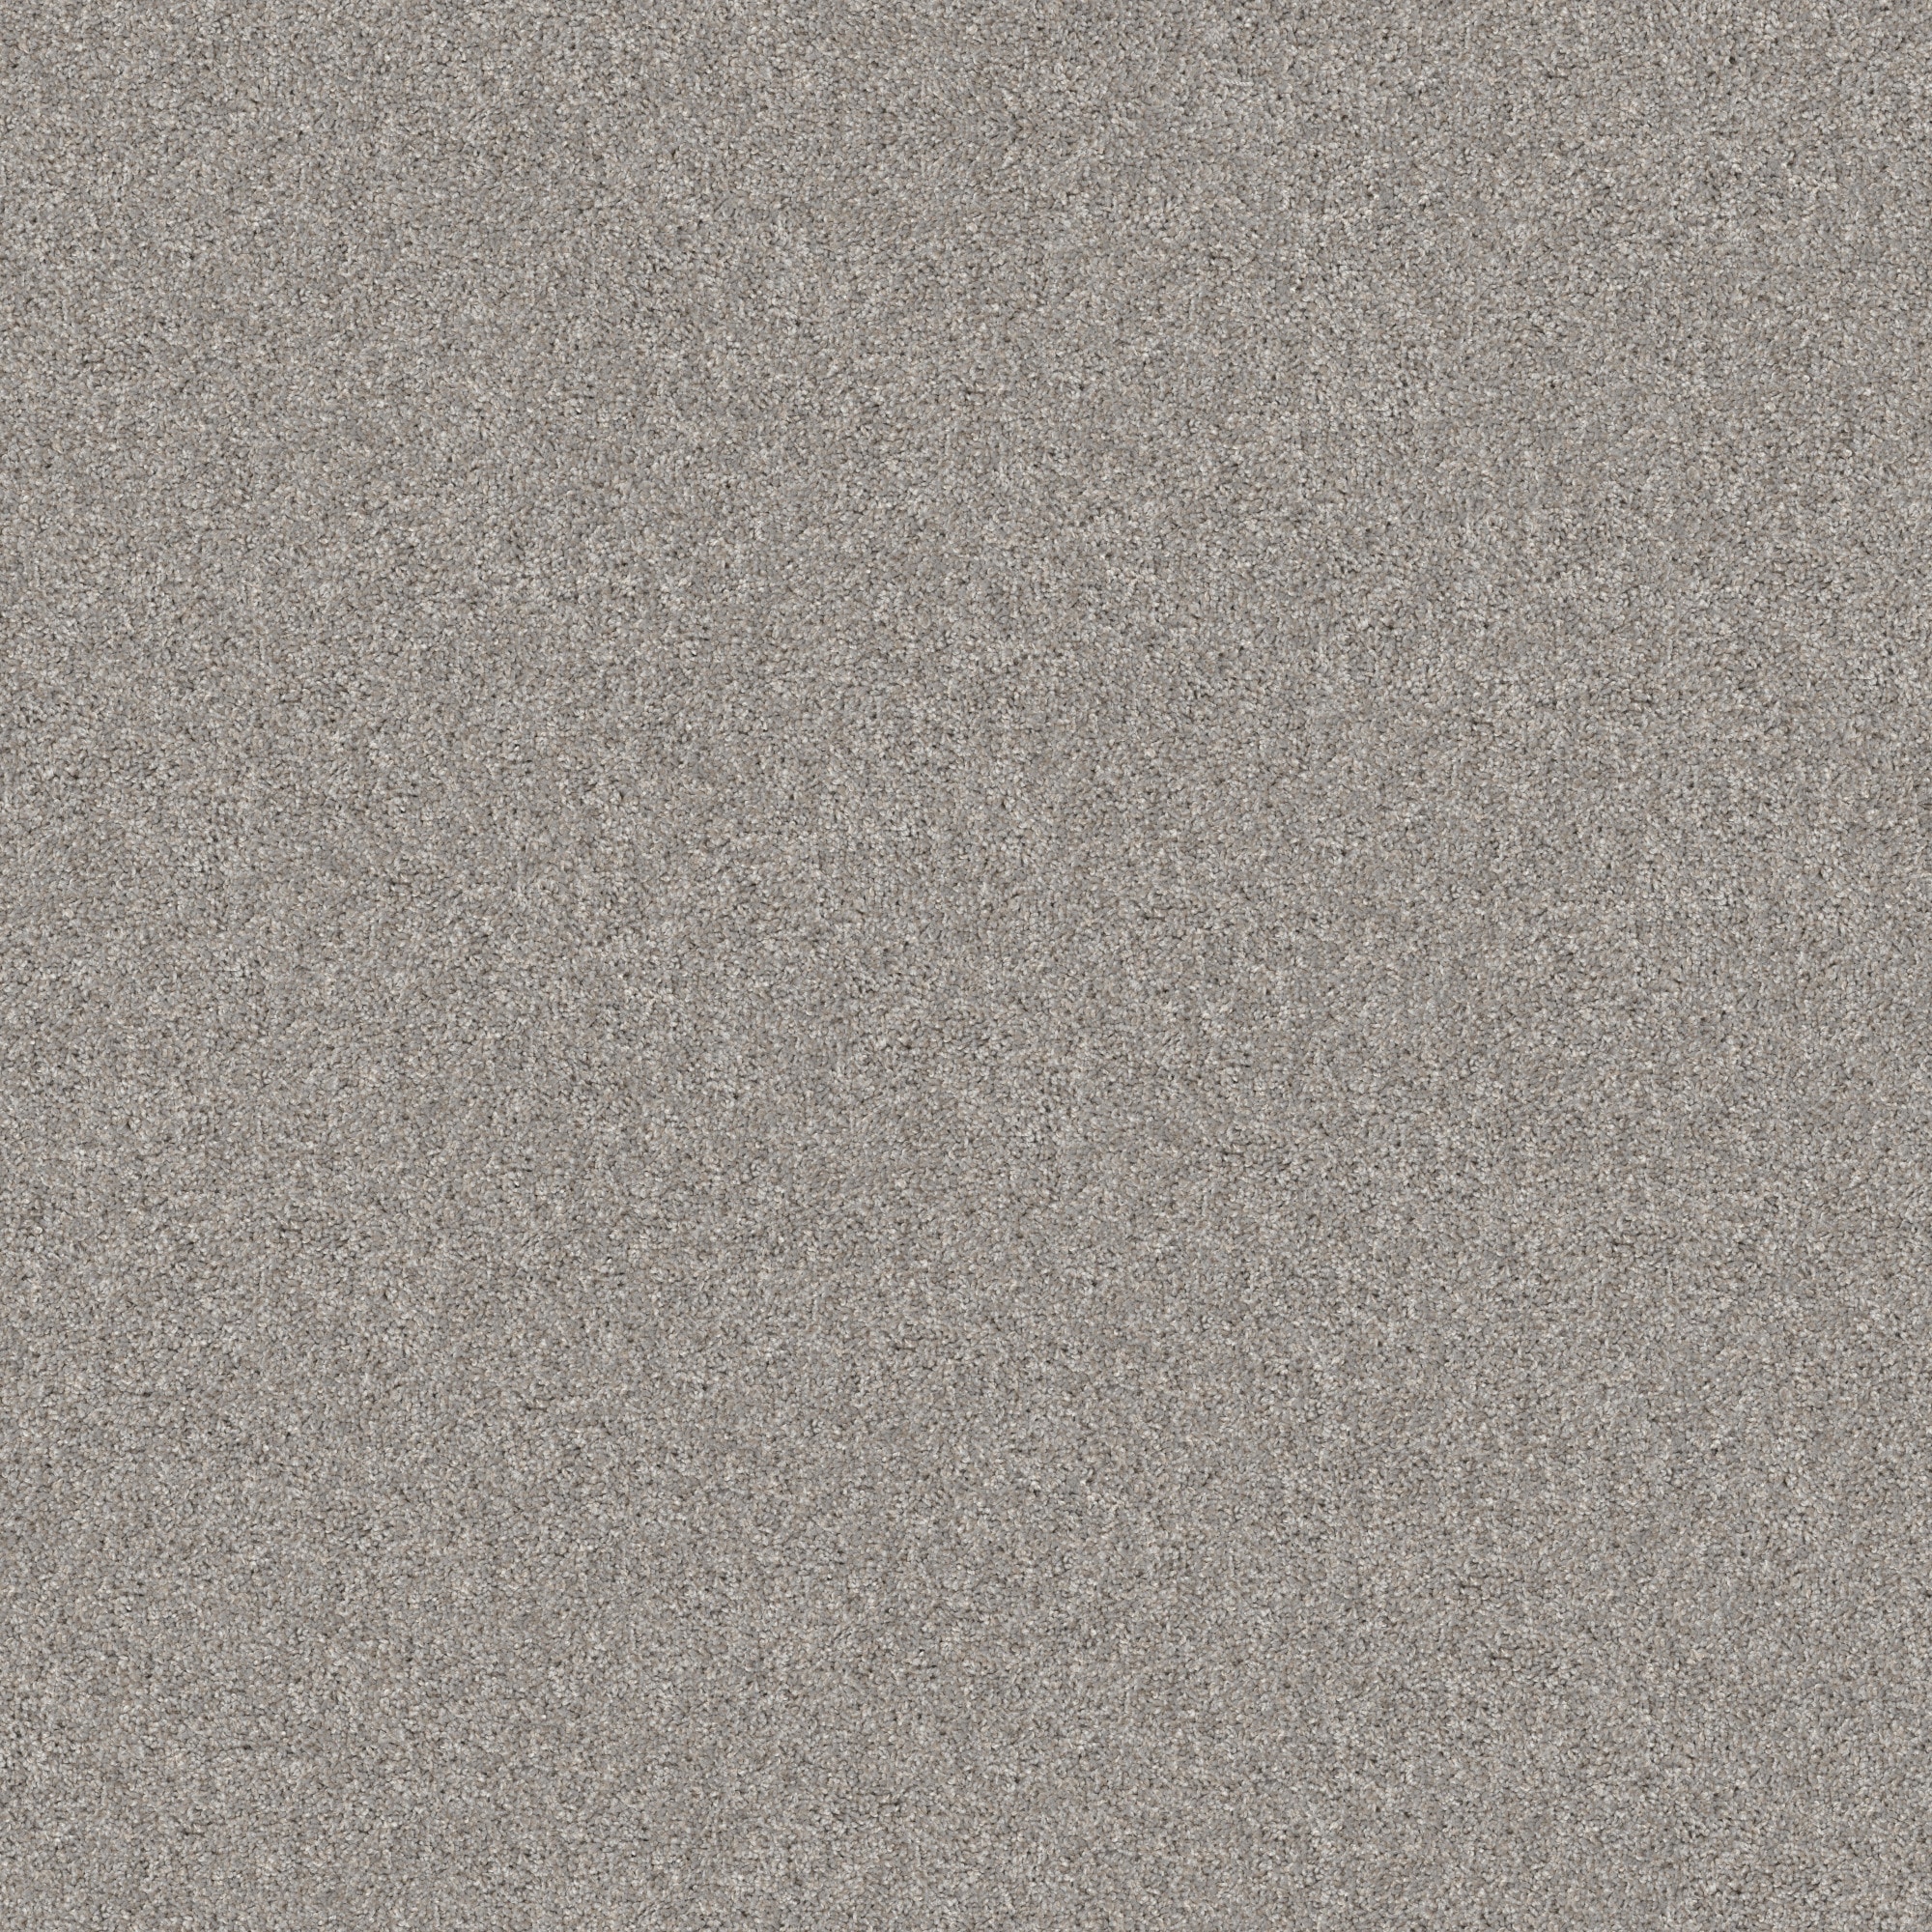 STAINMASTER Impassioned I 15-FT Rock Crystal Gray 58.5-oz sq yard ...